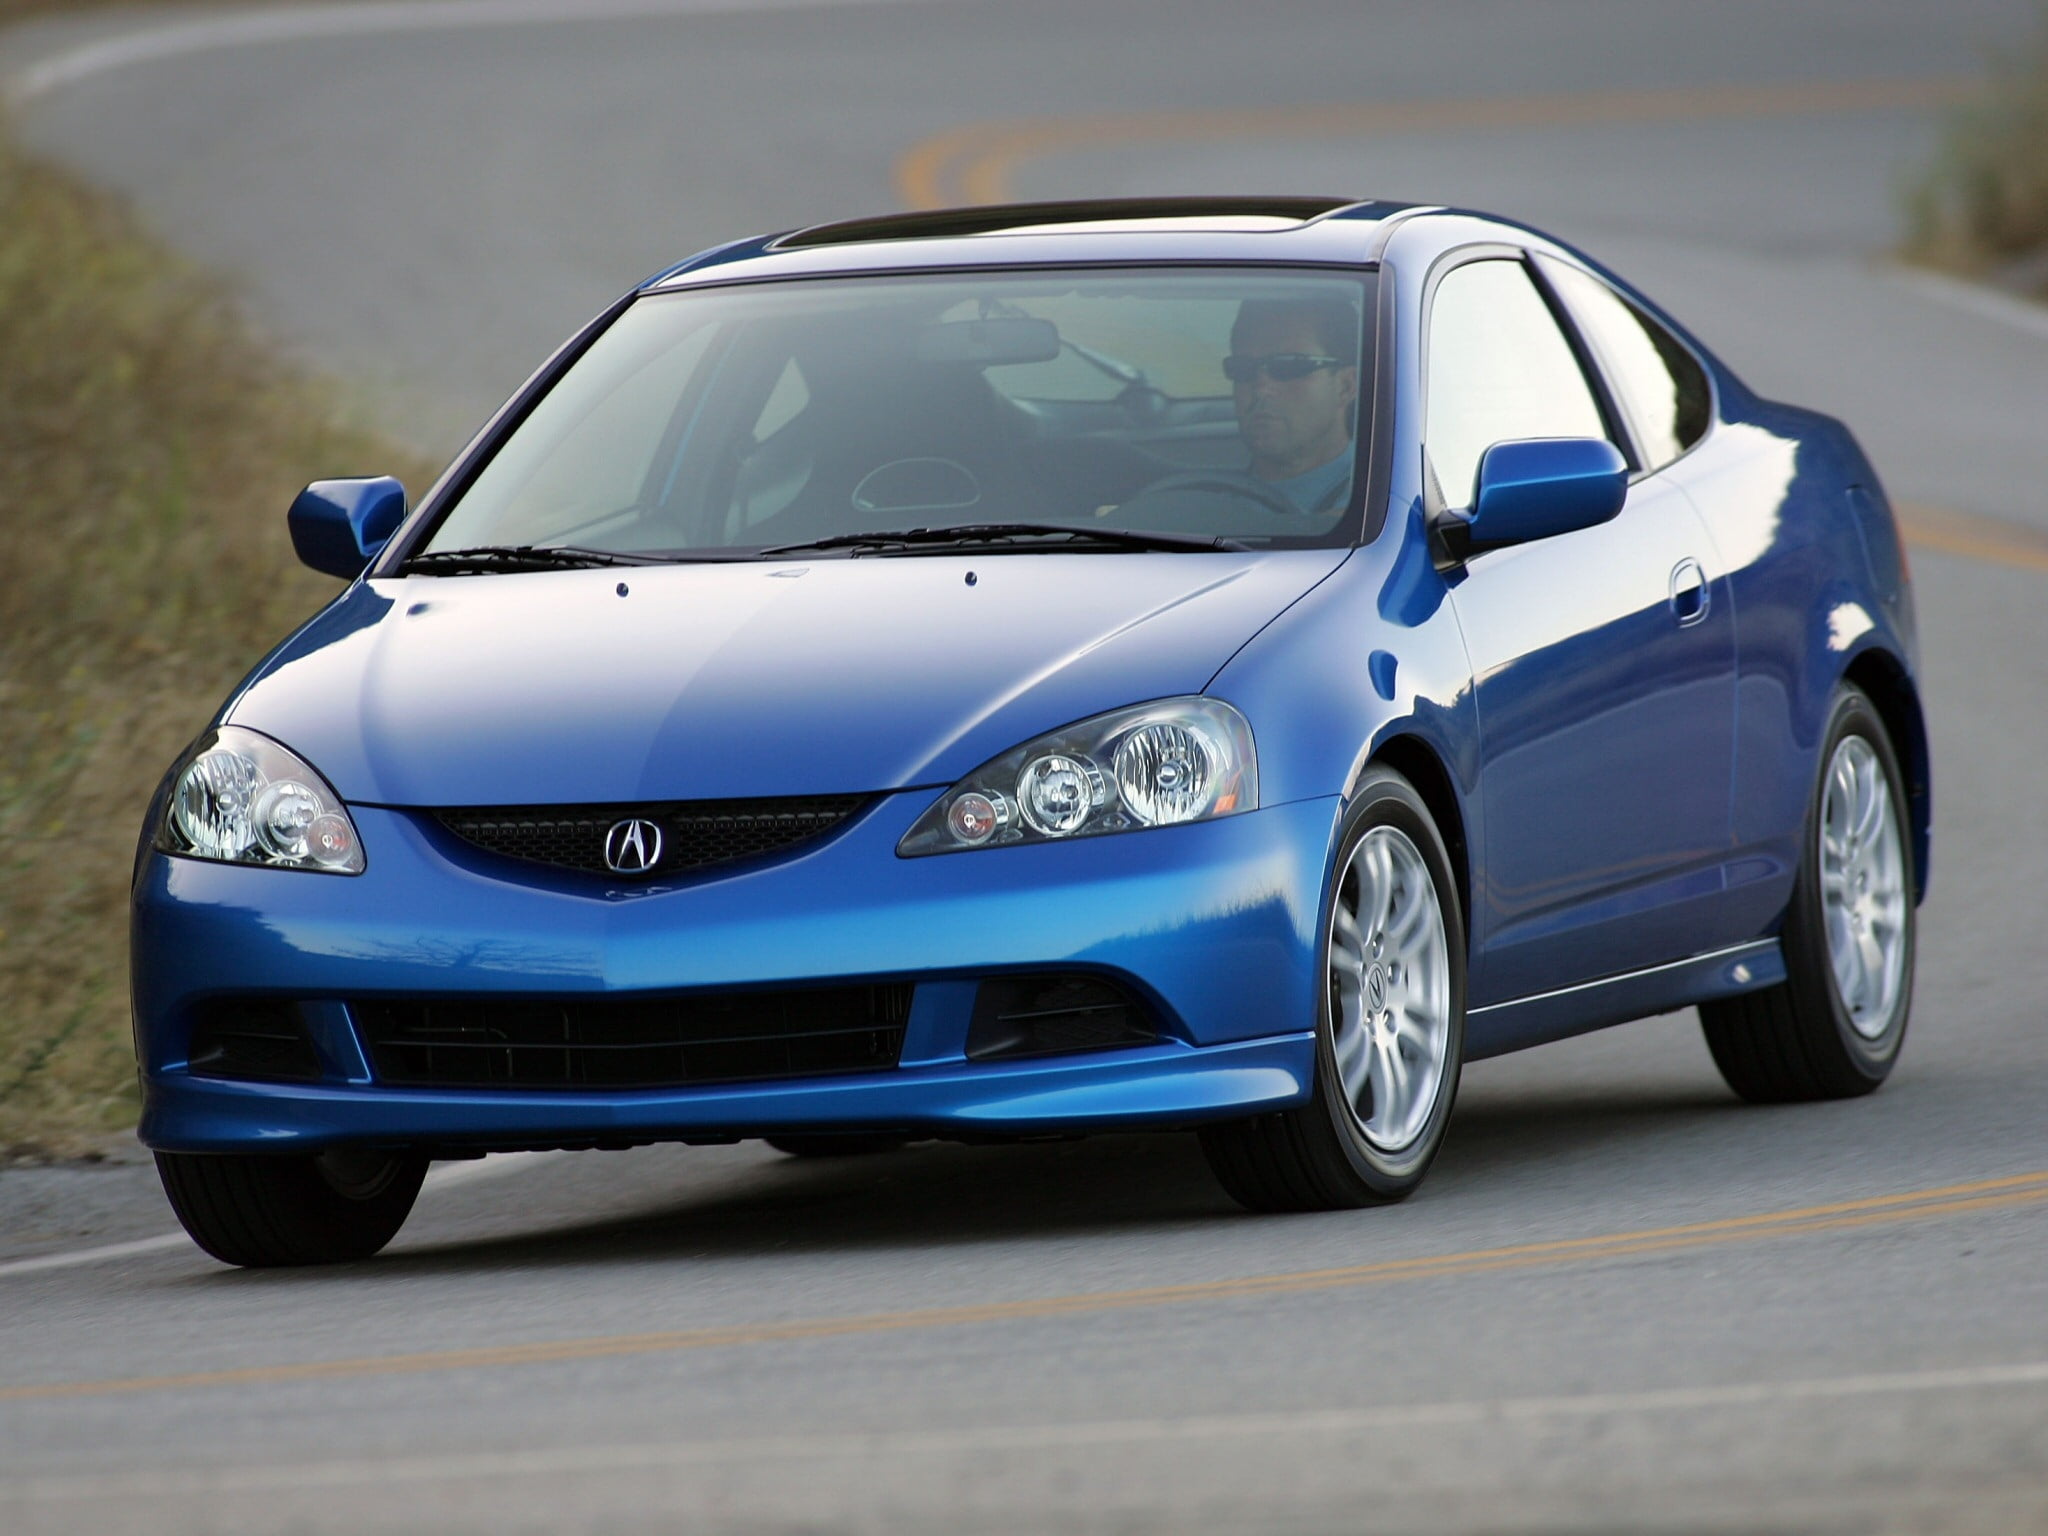 blue Acura RSX coupe, 2005, style, cars, road, land Vehicle, transportation